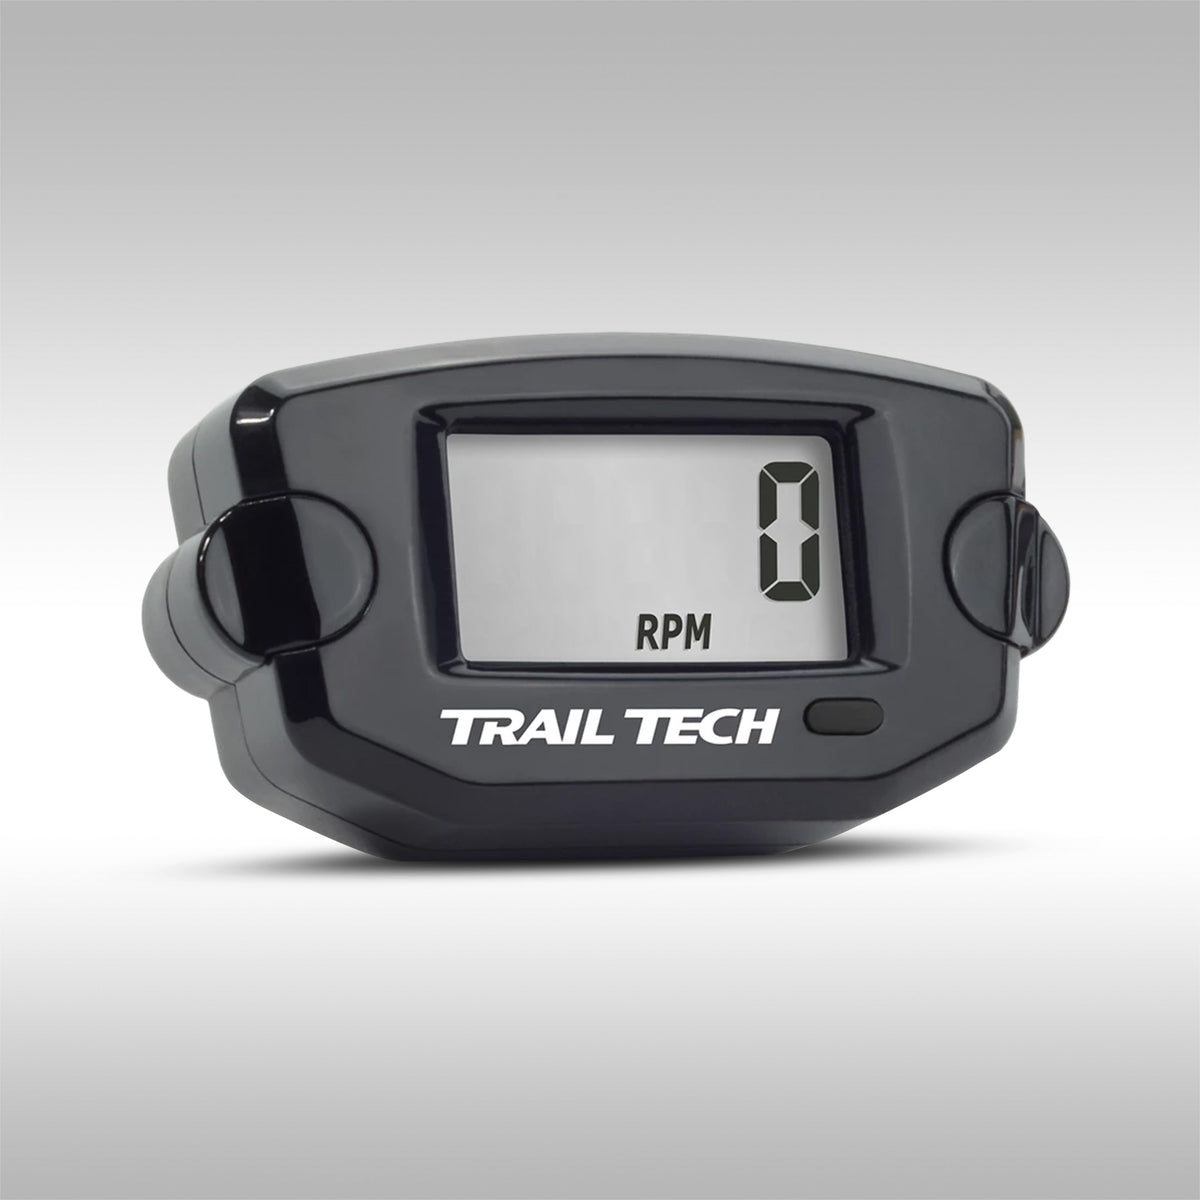 digital tachometer and hour gauge allows you to easily monitor RPM and hours of use. Large readable display allows you to easily monitor your engine&#39;s running hours up to 99,999 total hours ensuring that you perform proper maintenance on your engine. Motorcycle engine maintenance intervals tracked.